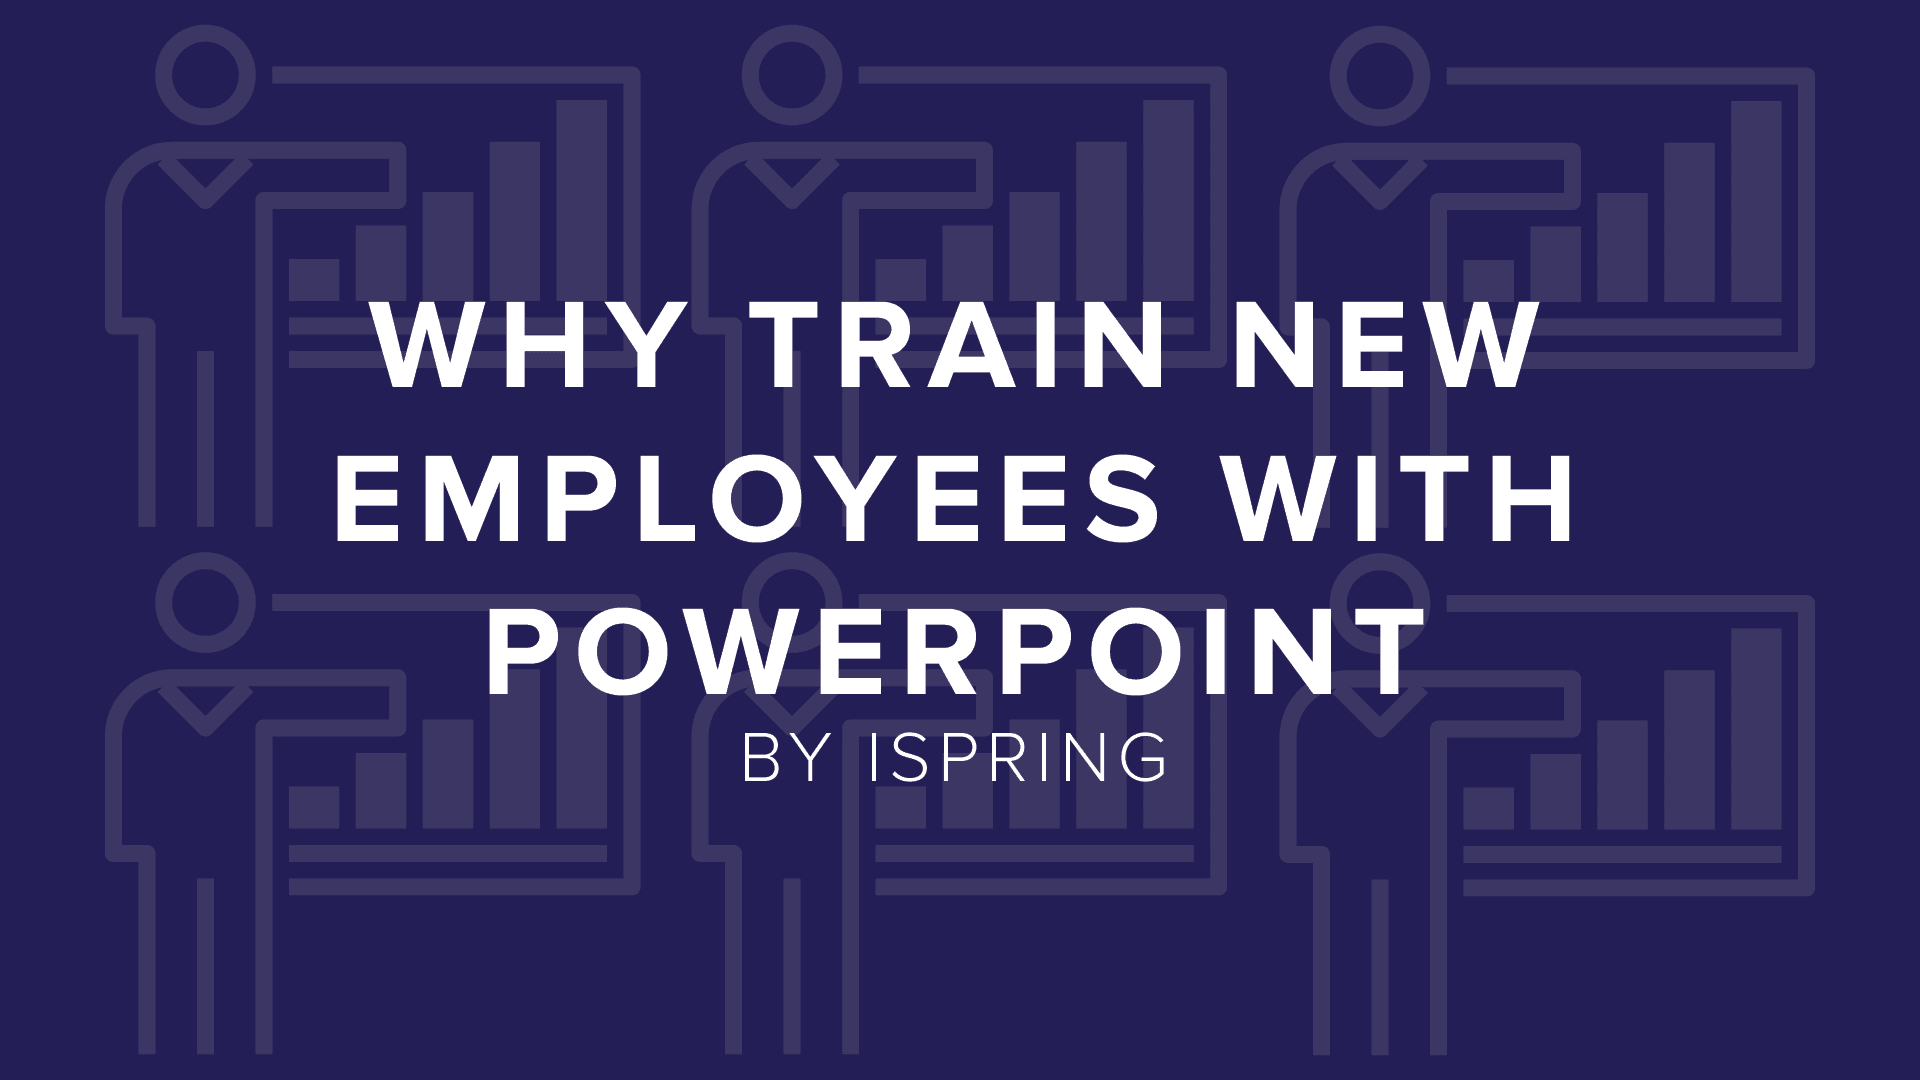 DigitalChalk: Why PowerPoint is Effective for Training New Employees by iSpring